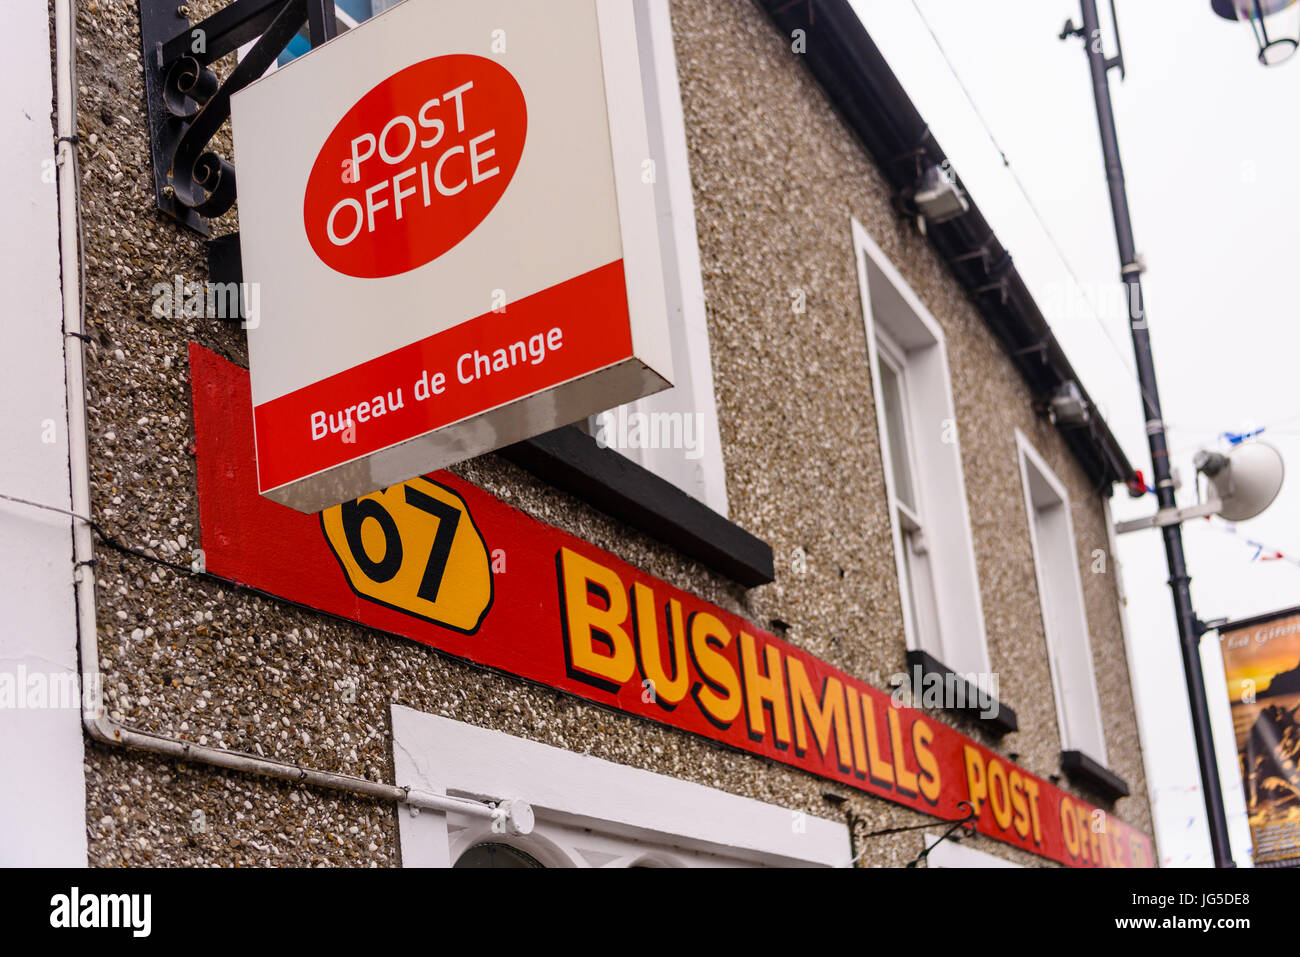 Old Post Office in Bushmills, County Antrim, Northern Ireland Stock Photo